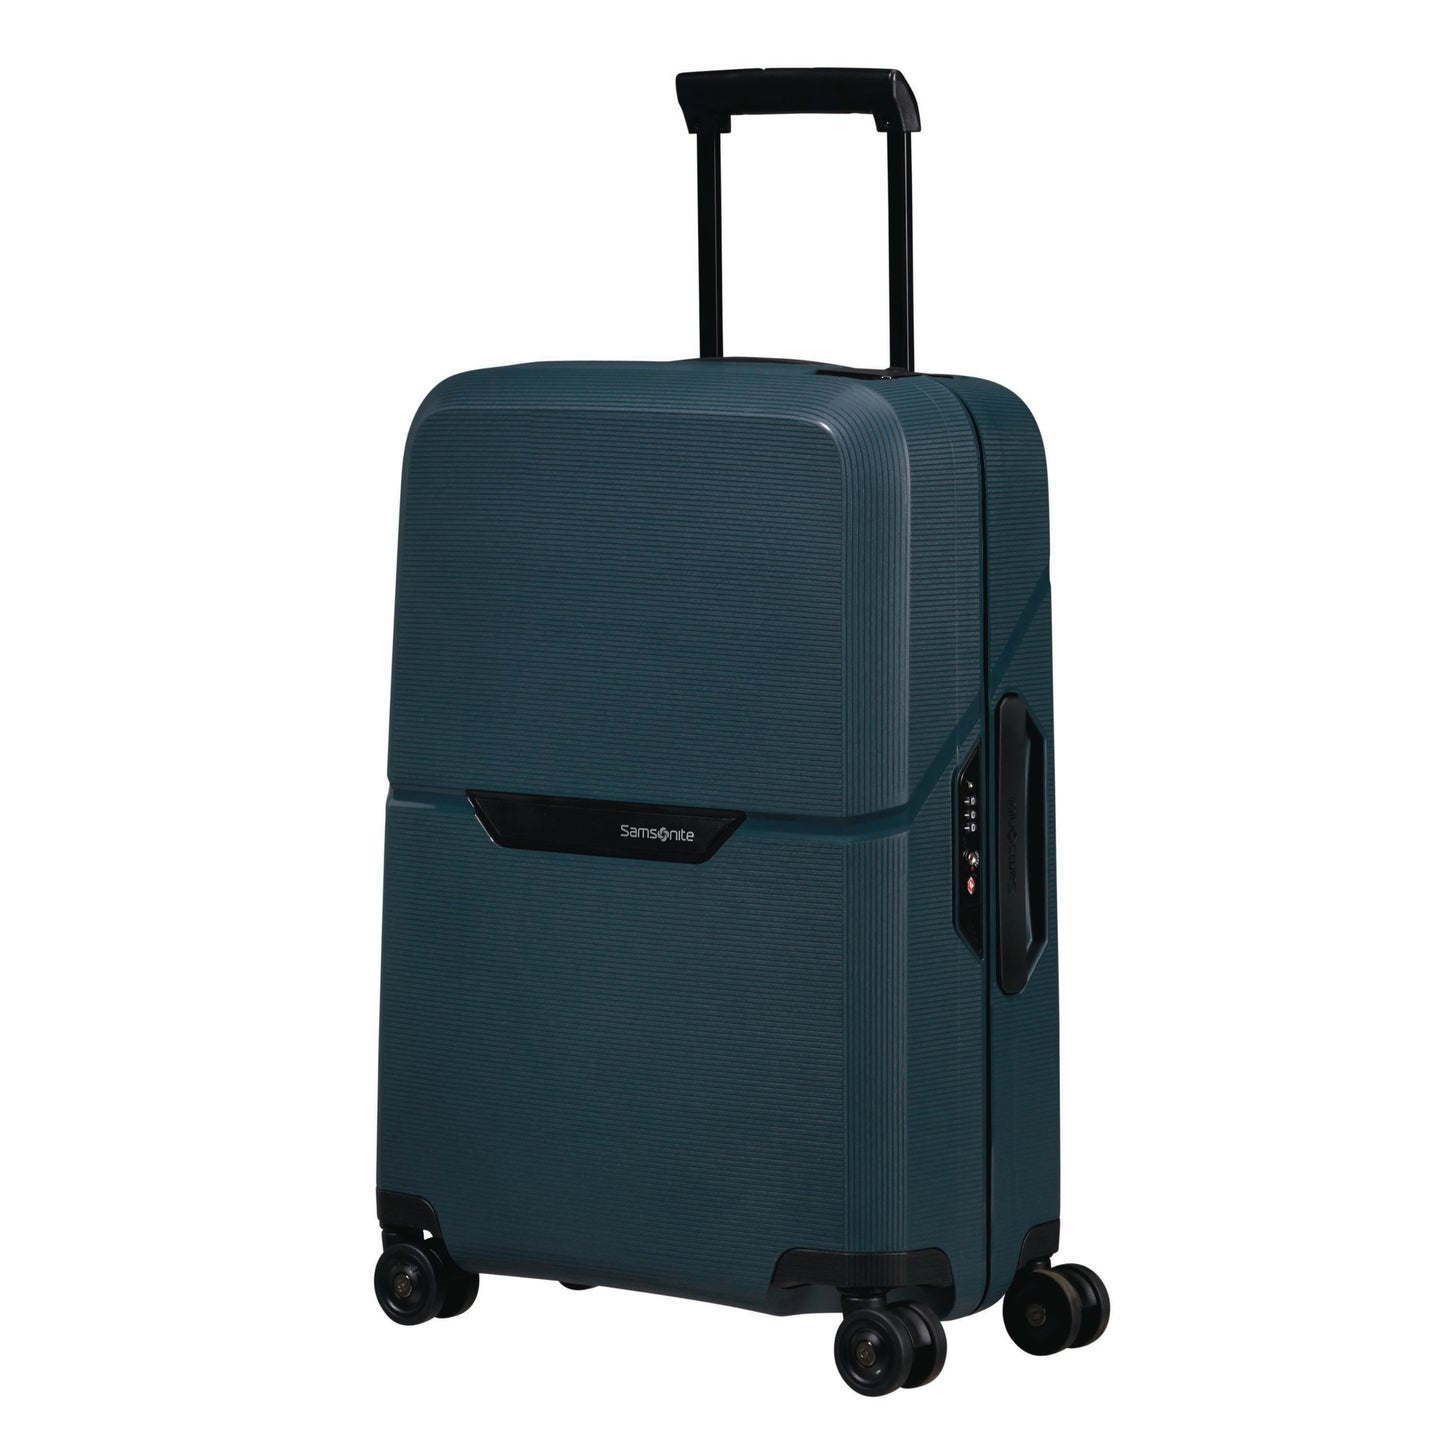 MAGNUM ECO Trolley mit 4 Rollen Hartgepäck Koffer - Laure Bags and Travel